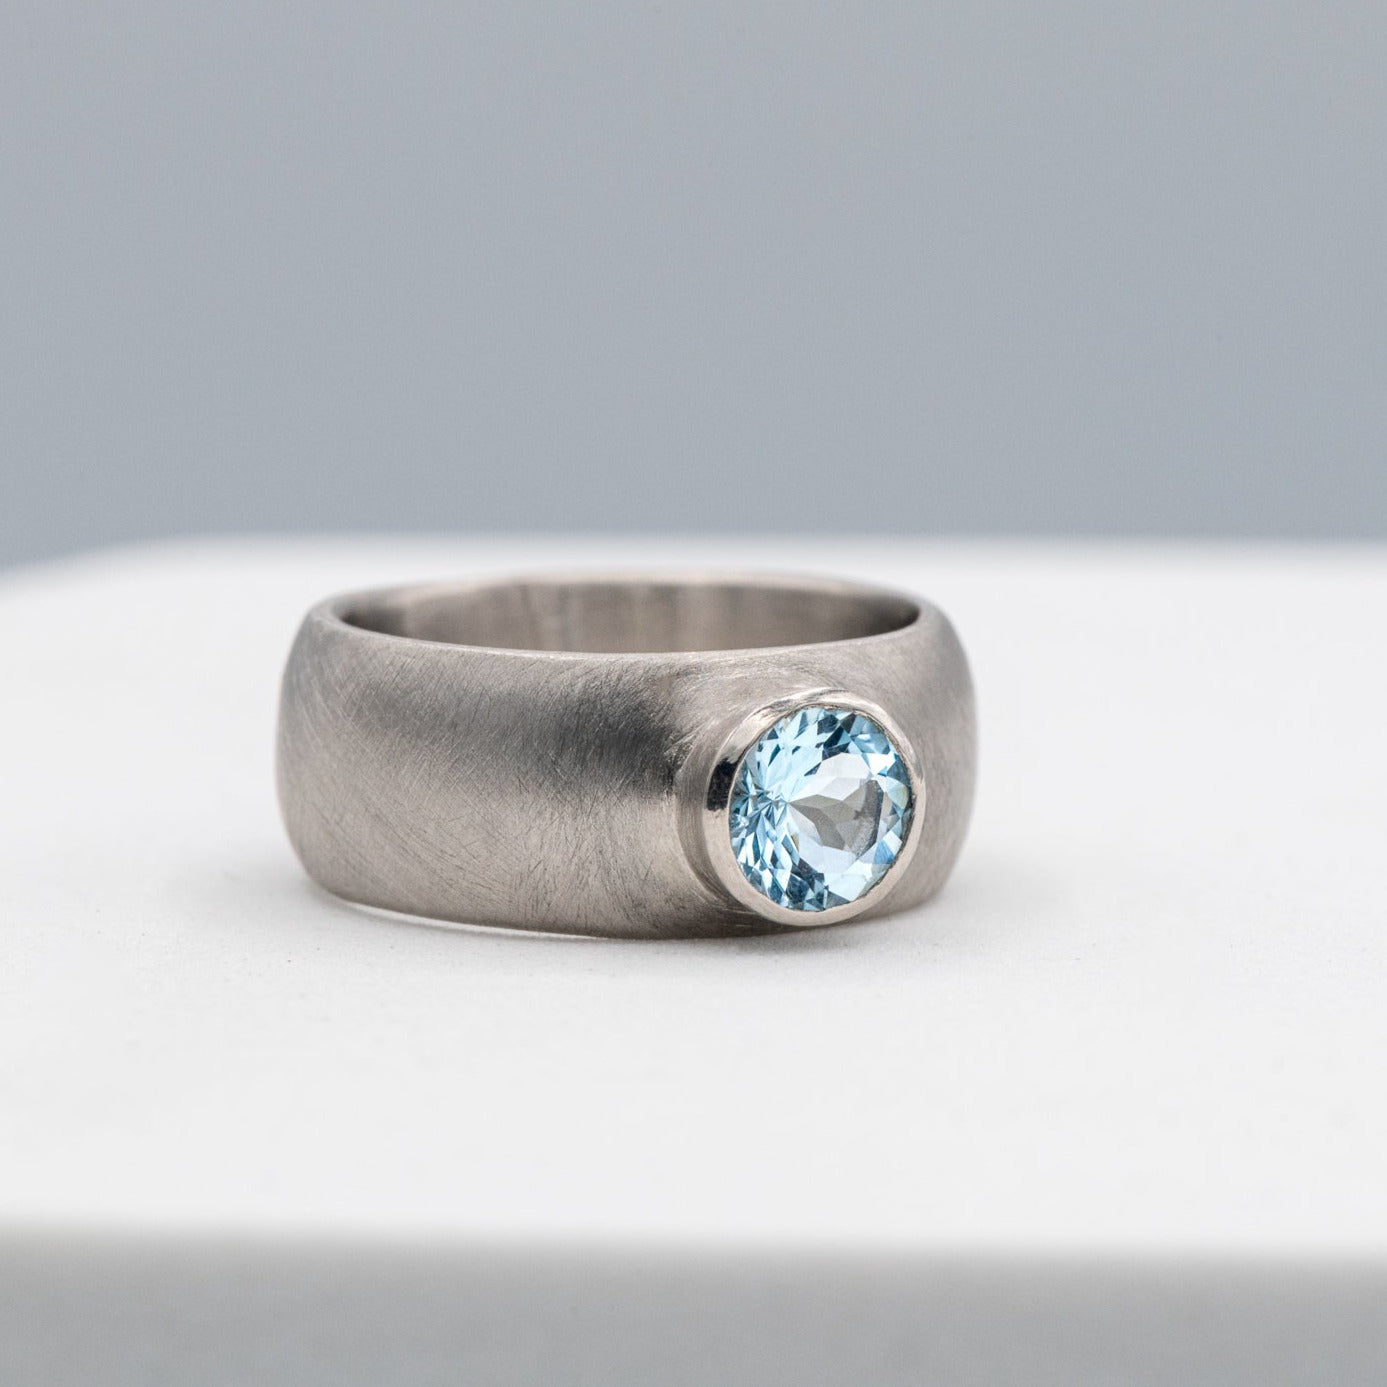 A handmade silver ring with a Chunky White Gold Engagement Ring by Cassin Jewelry.